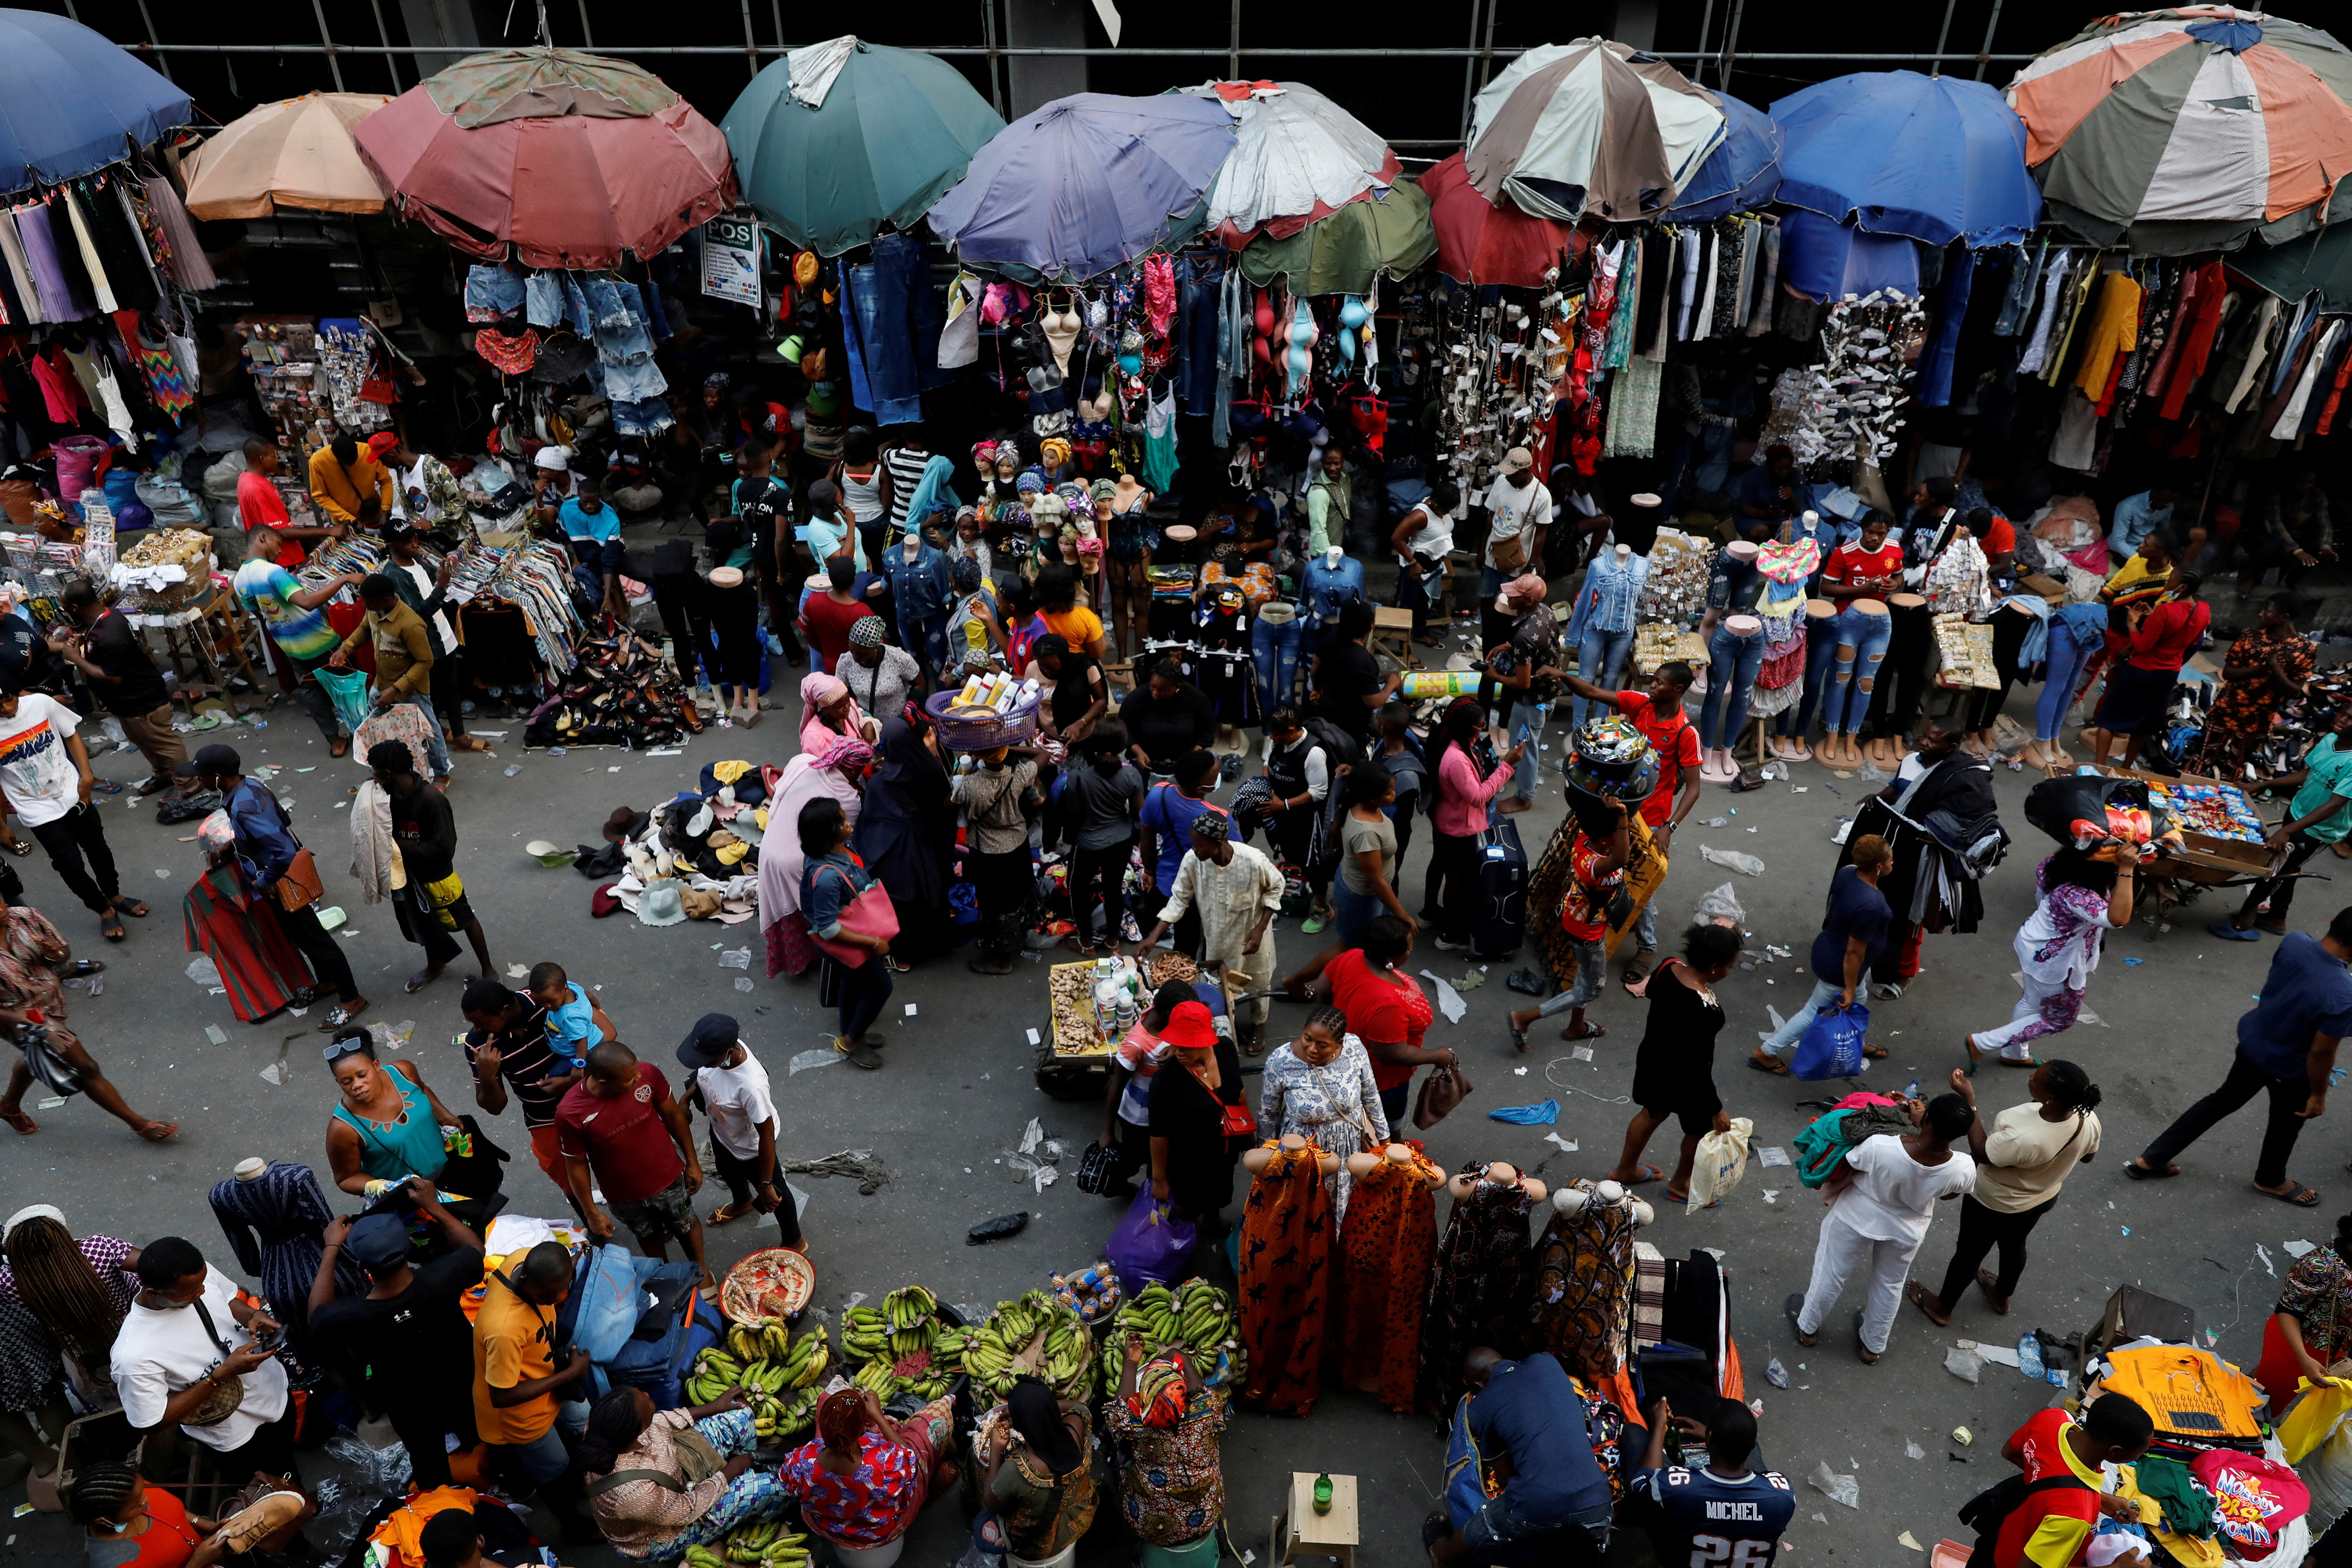 People crowd a market place in Lagos